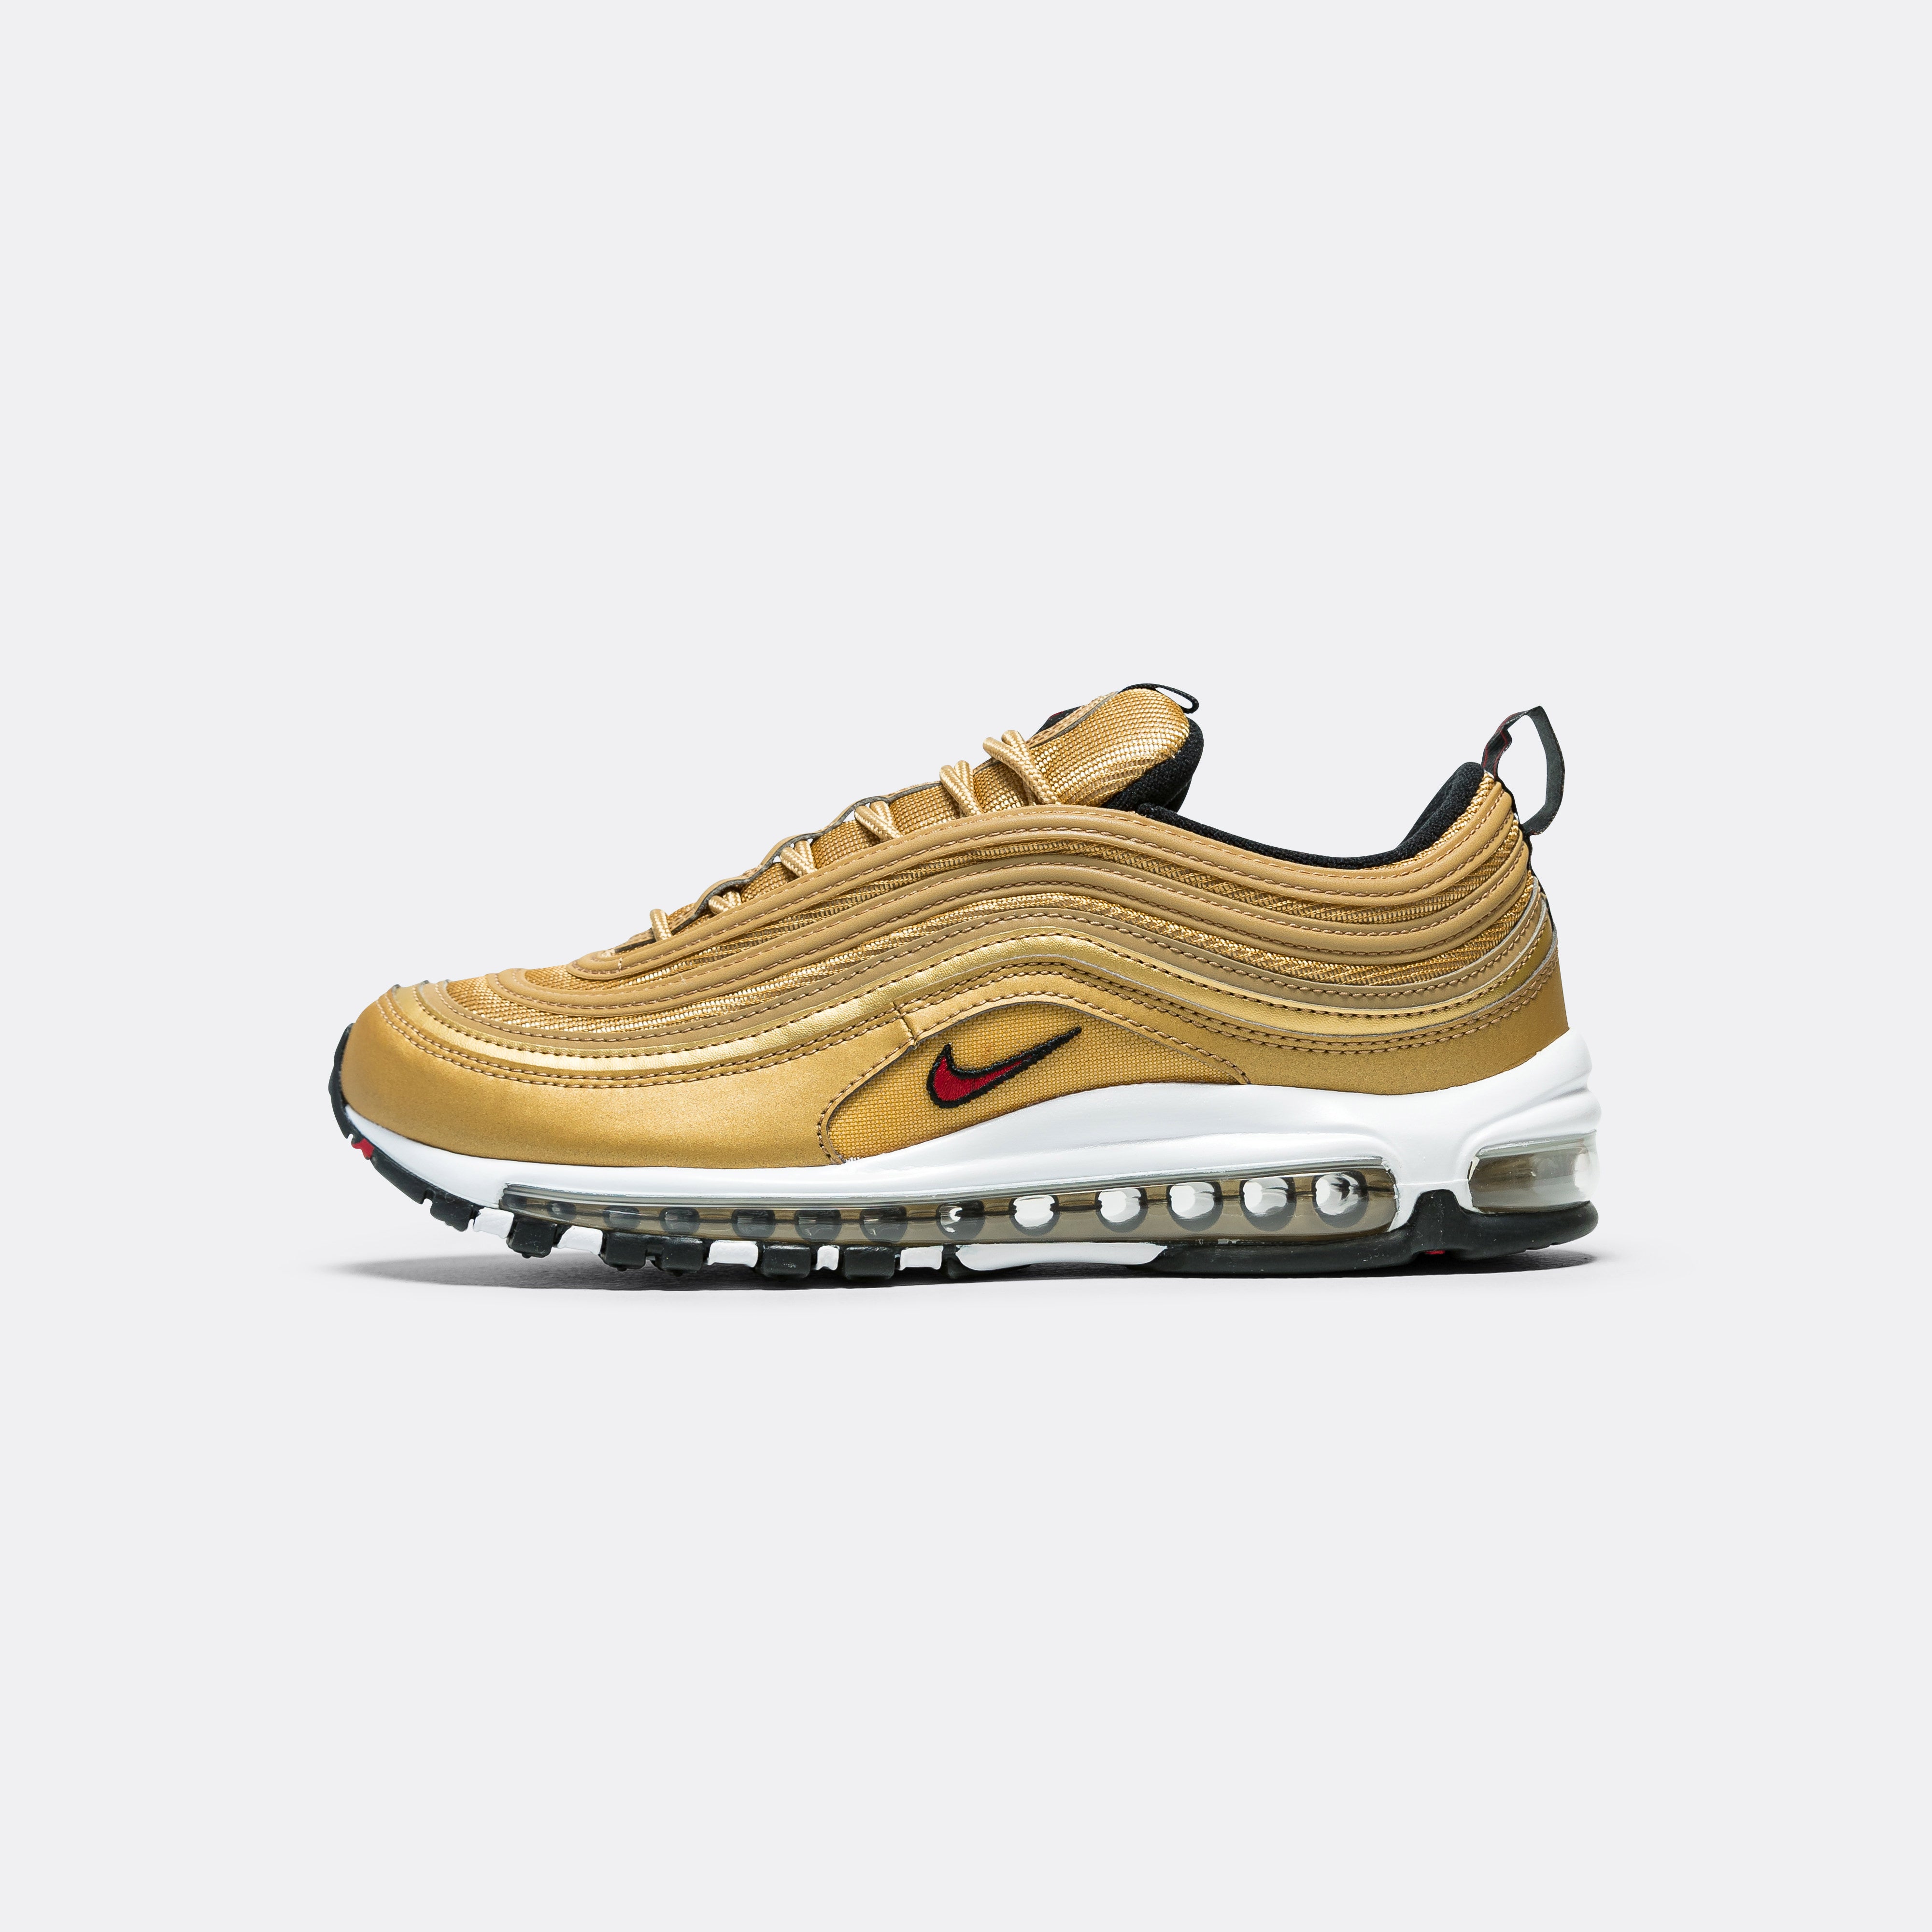 Cabina Cerdo usuario Nike Air Max 97 OG - Metallic Gold/Varsity Red/Black | Up There | UP THERE